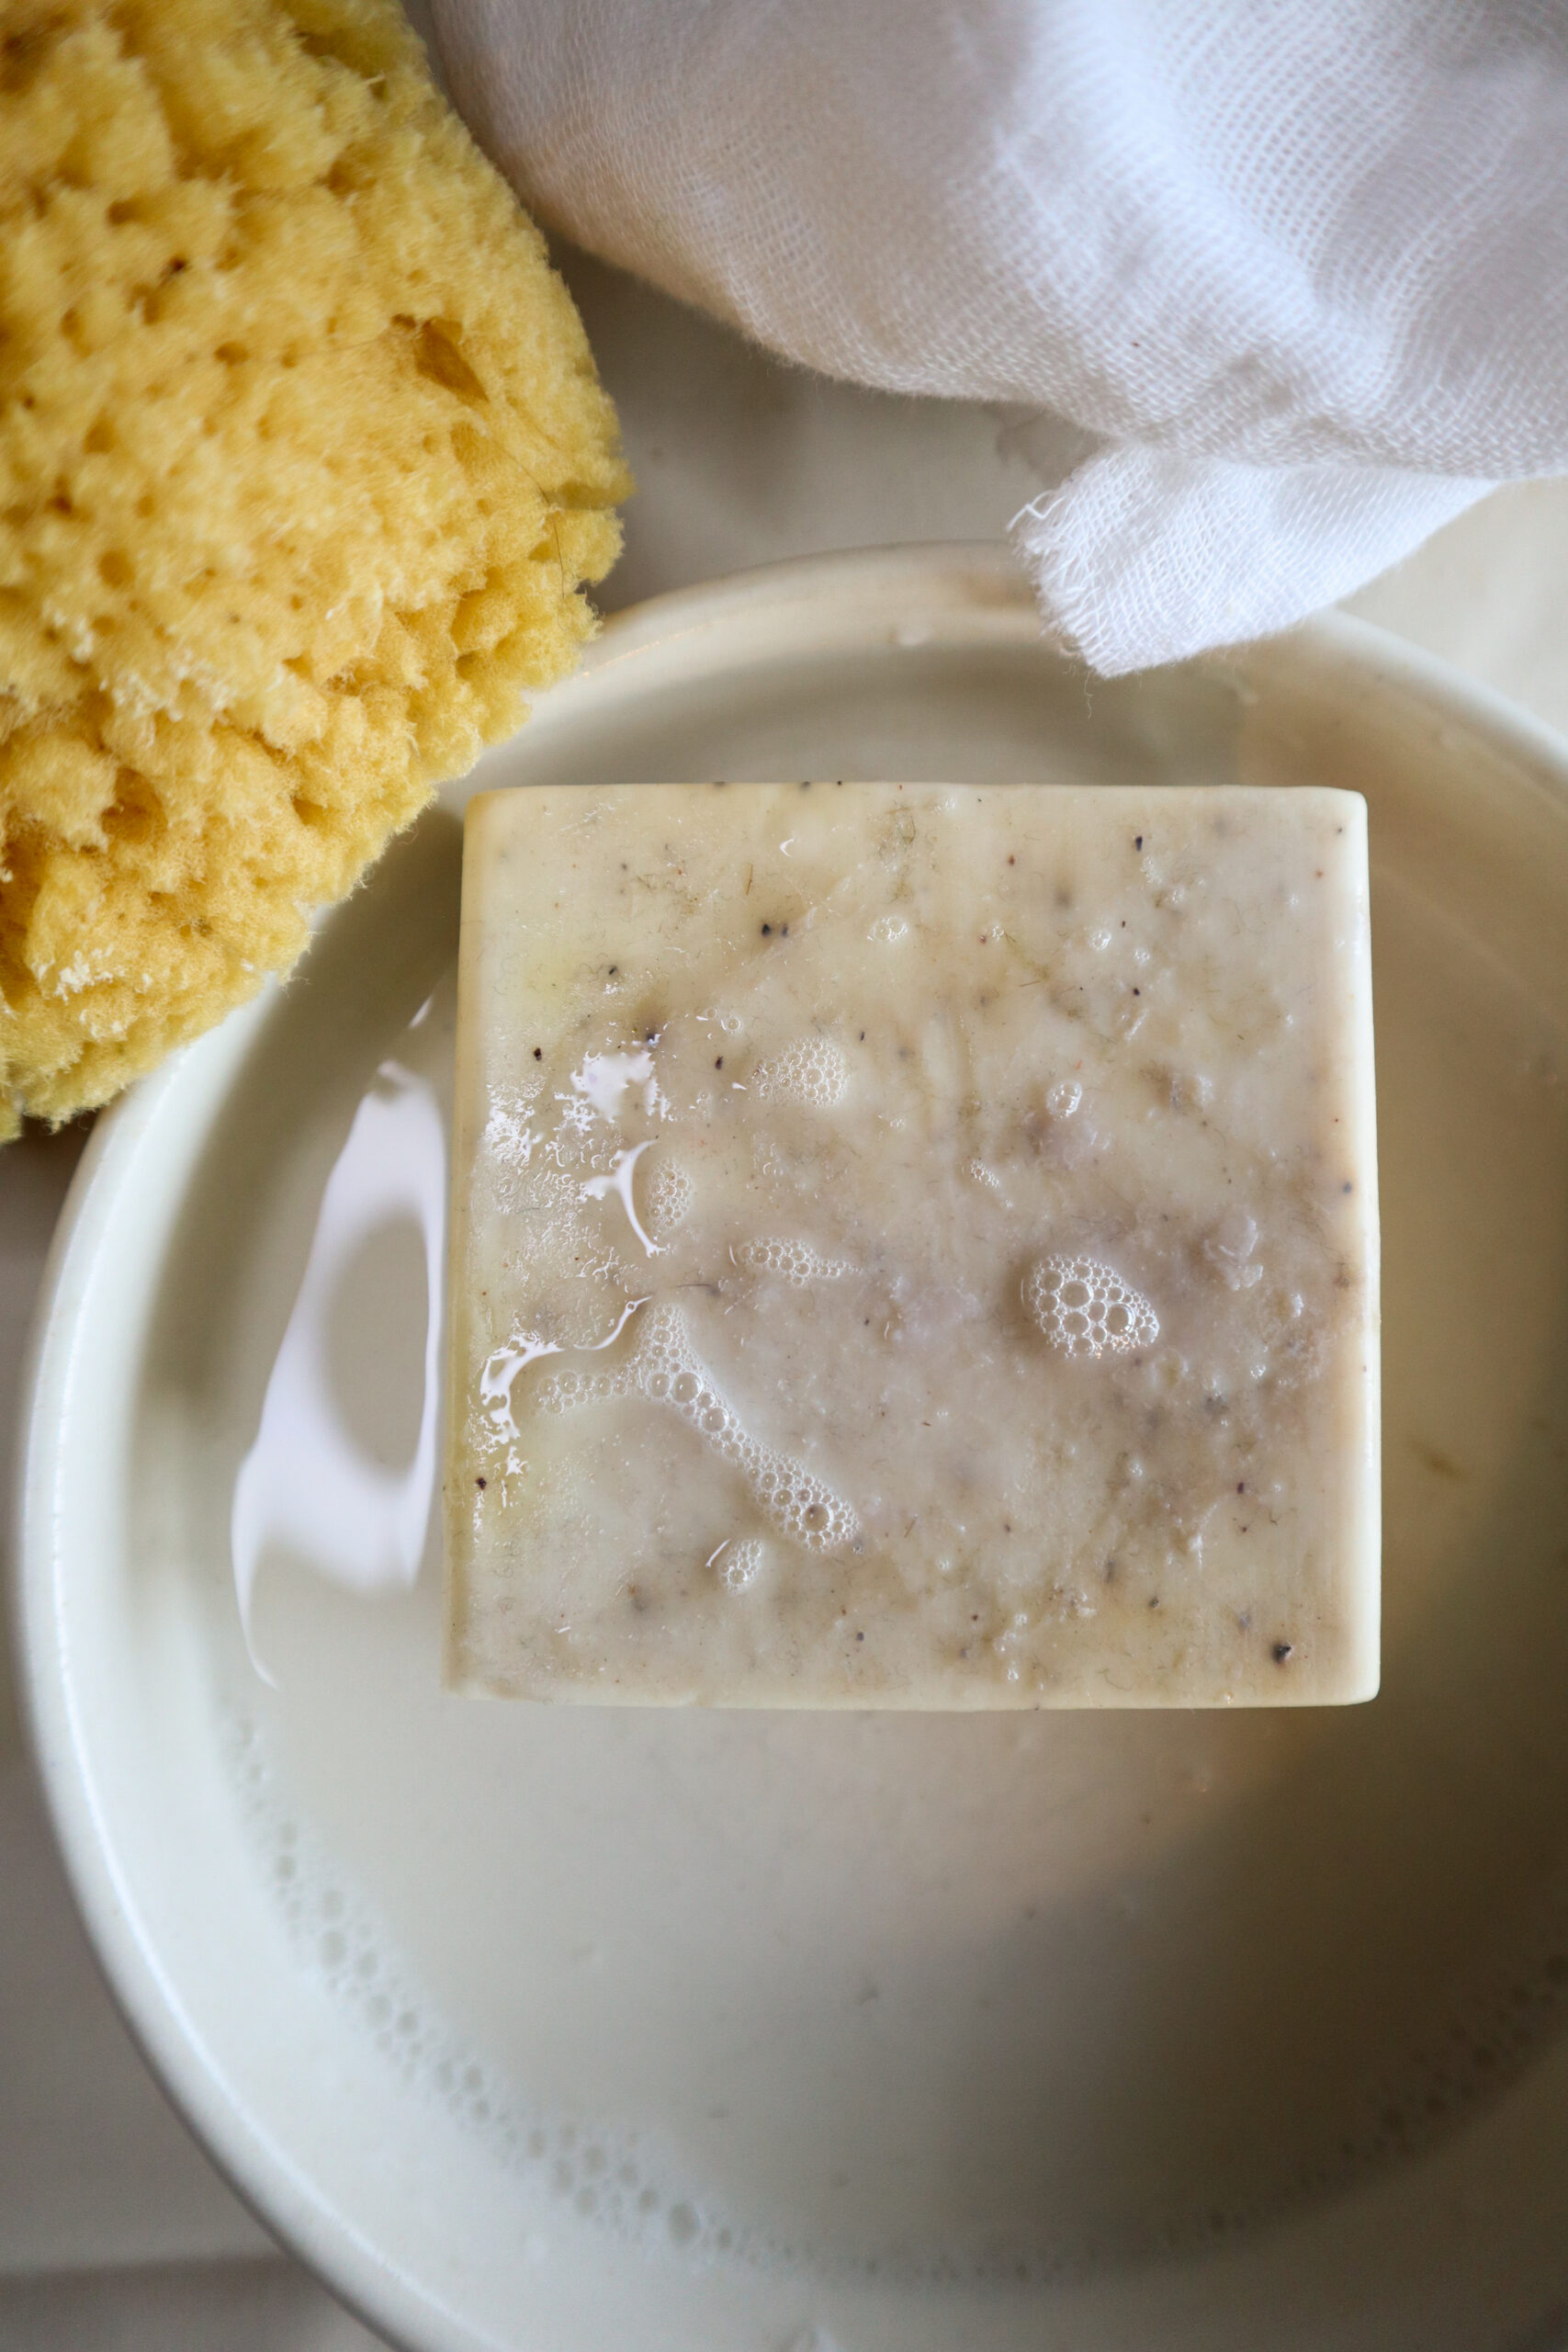 sudsy soap and natural sponge